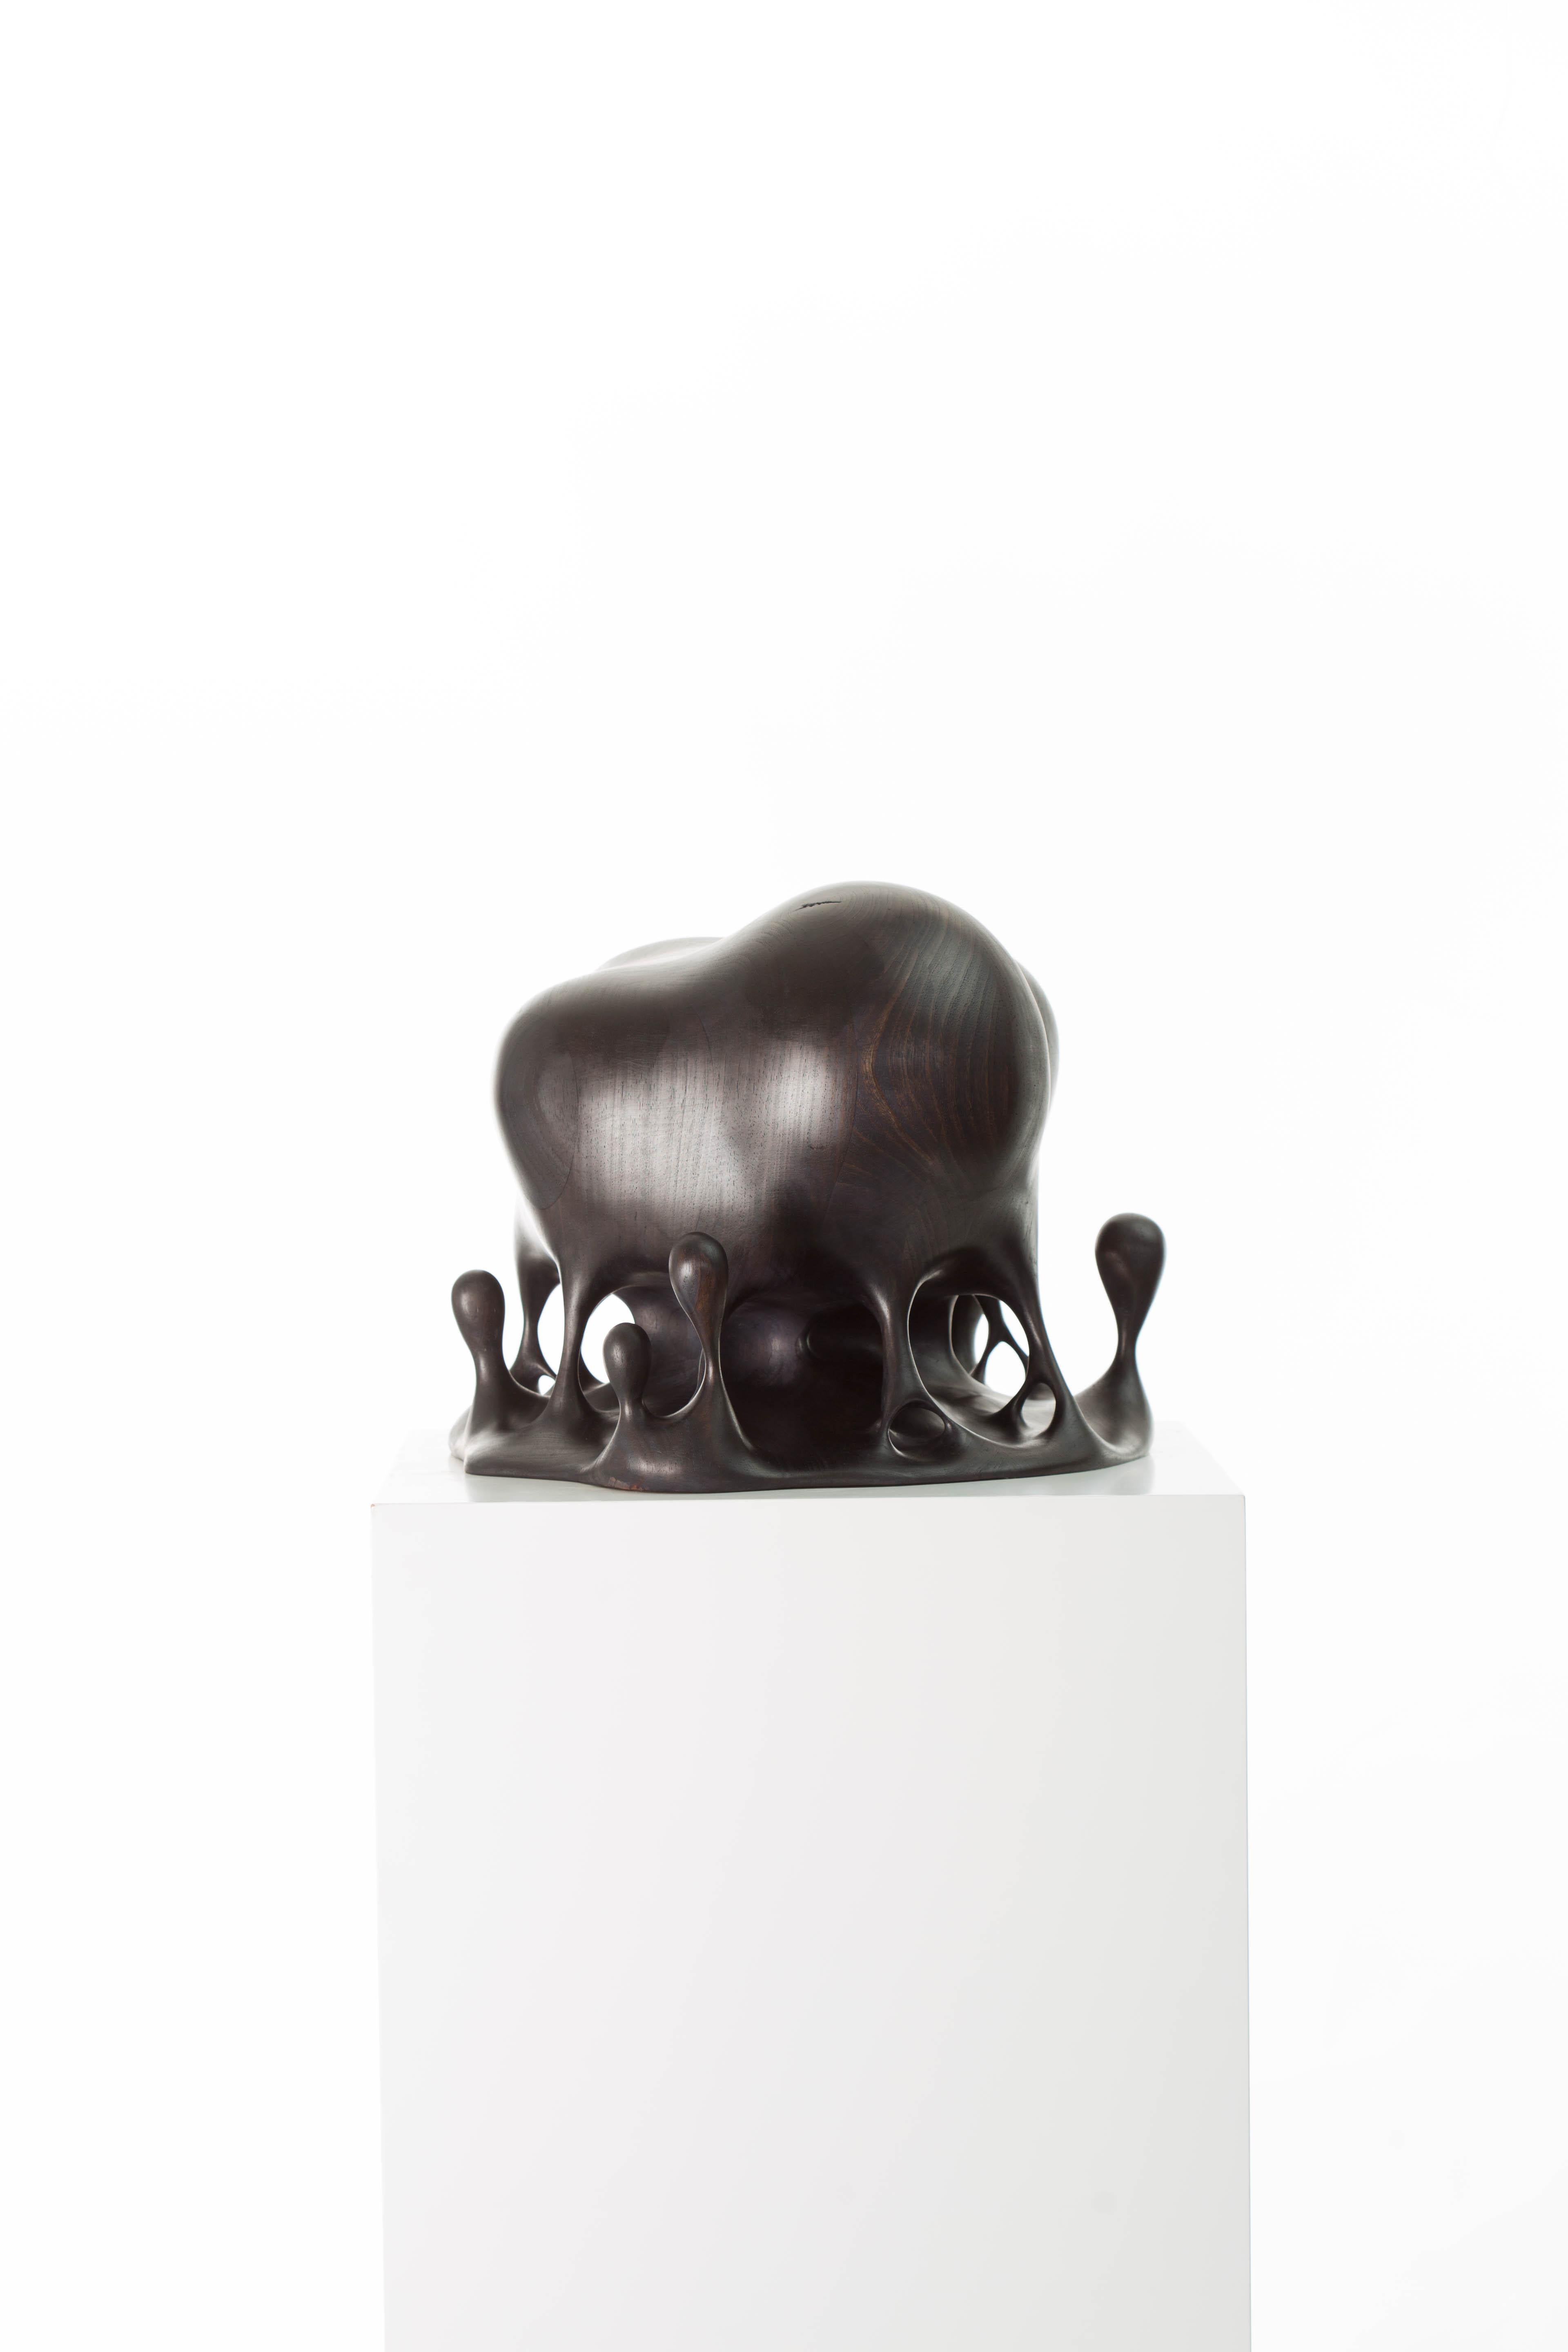 Was the love real? sculpture by Driaan Claassen
Limited Edition
Dimensions: D 32 x W 43 x H 36 cm
Materials: Wood: Kiaat
Weight: 7.5 kg

Born in Johannesburg in 1991, sculptor Driaan Claassen first studied 3D animation before apprenticing with